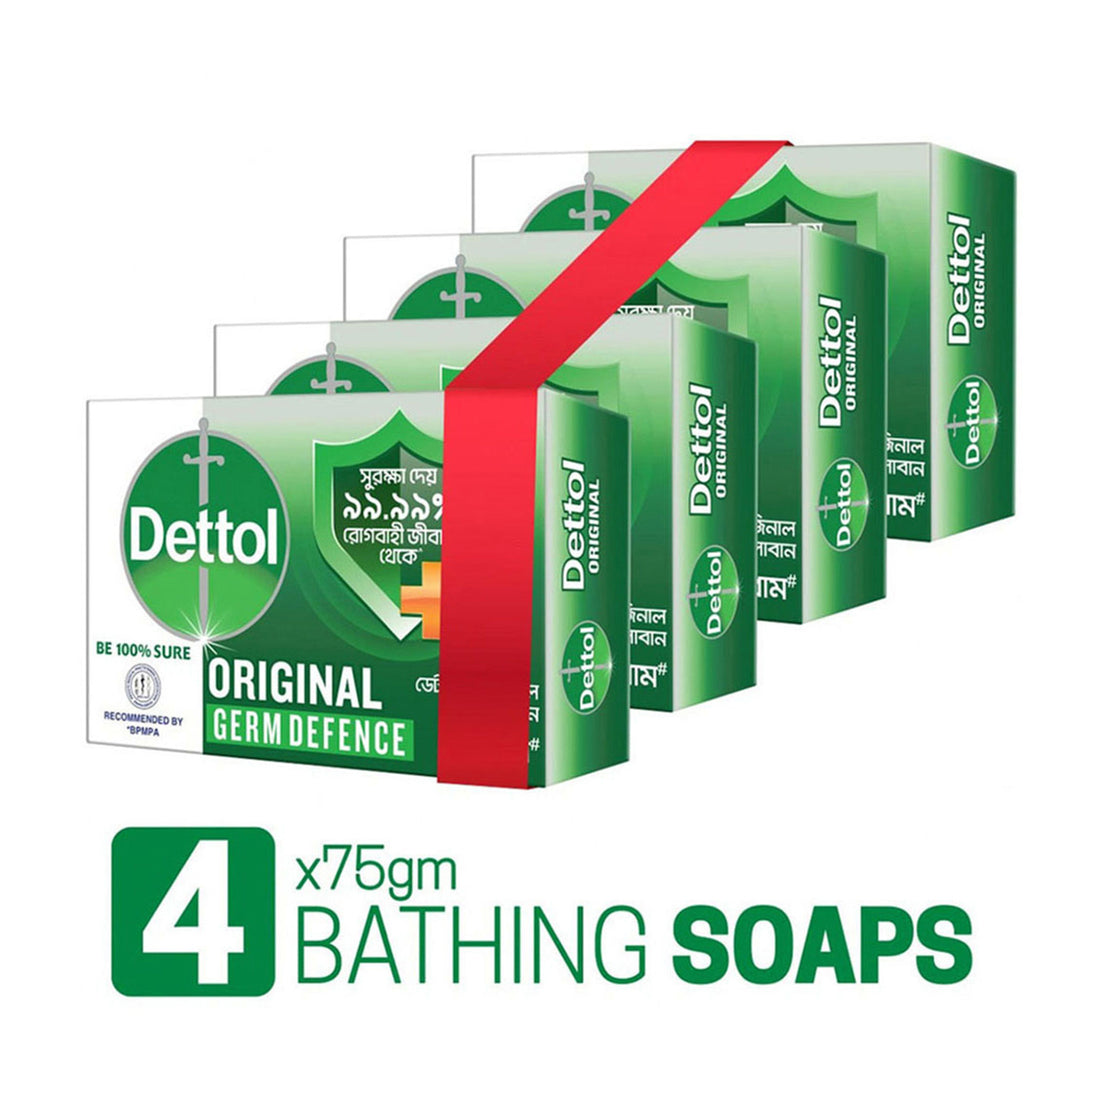 Dettol Soap Original Germ Defence Quad Pack (125gm X 4), Bathing Bar Soaps with protection from 99.99% illness-causing germs